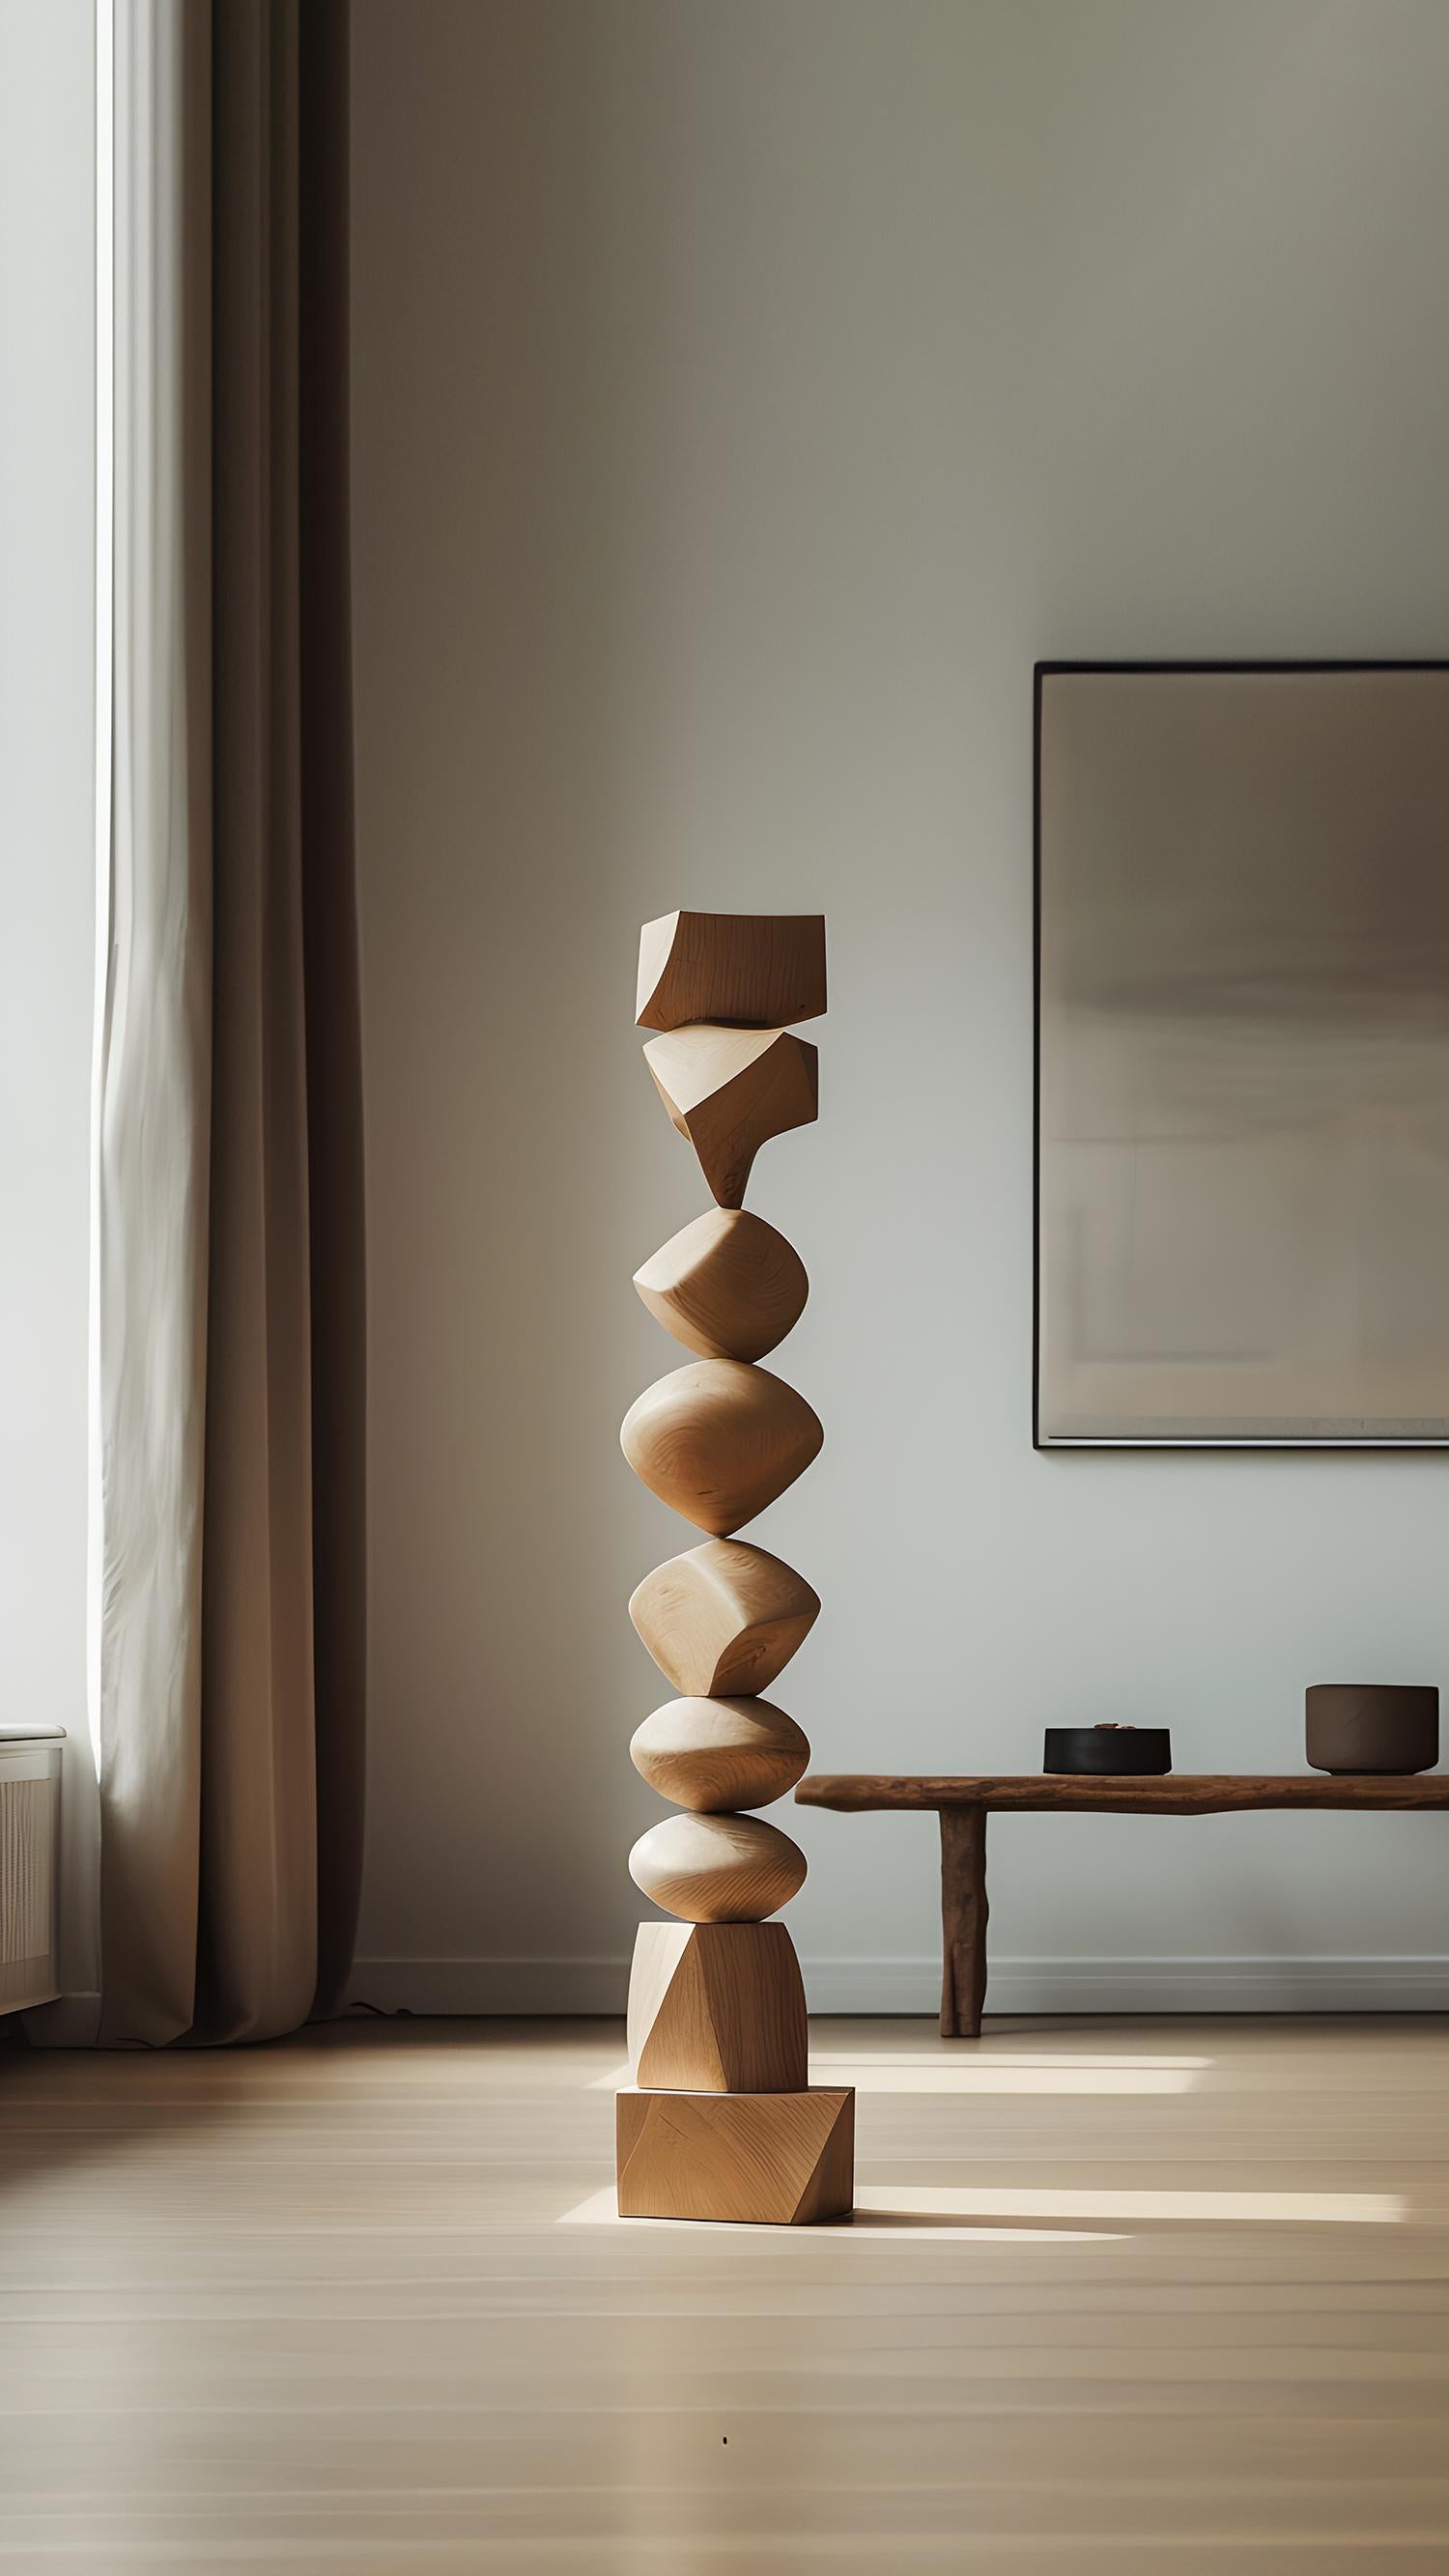 Hand-Crafted Still Stand No20: Serene Wooden Standing Sculpture by NONO, Escalona Designed For Sale